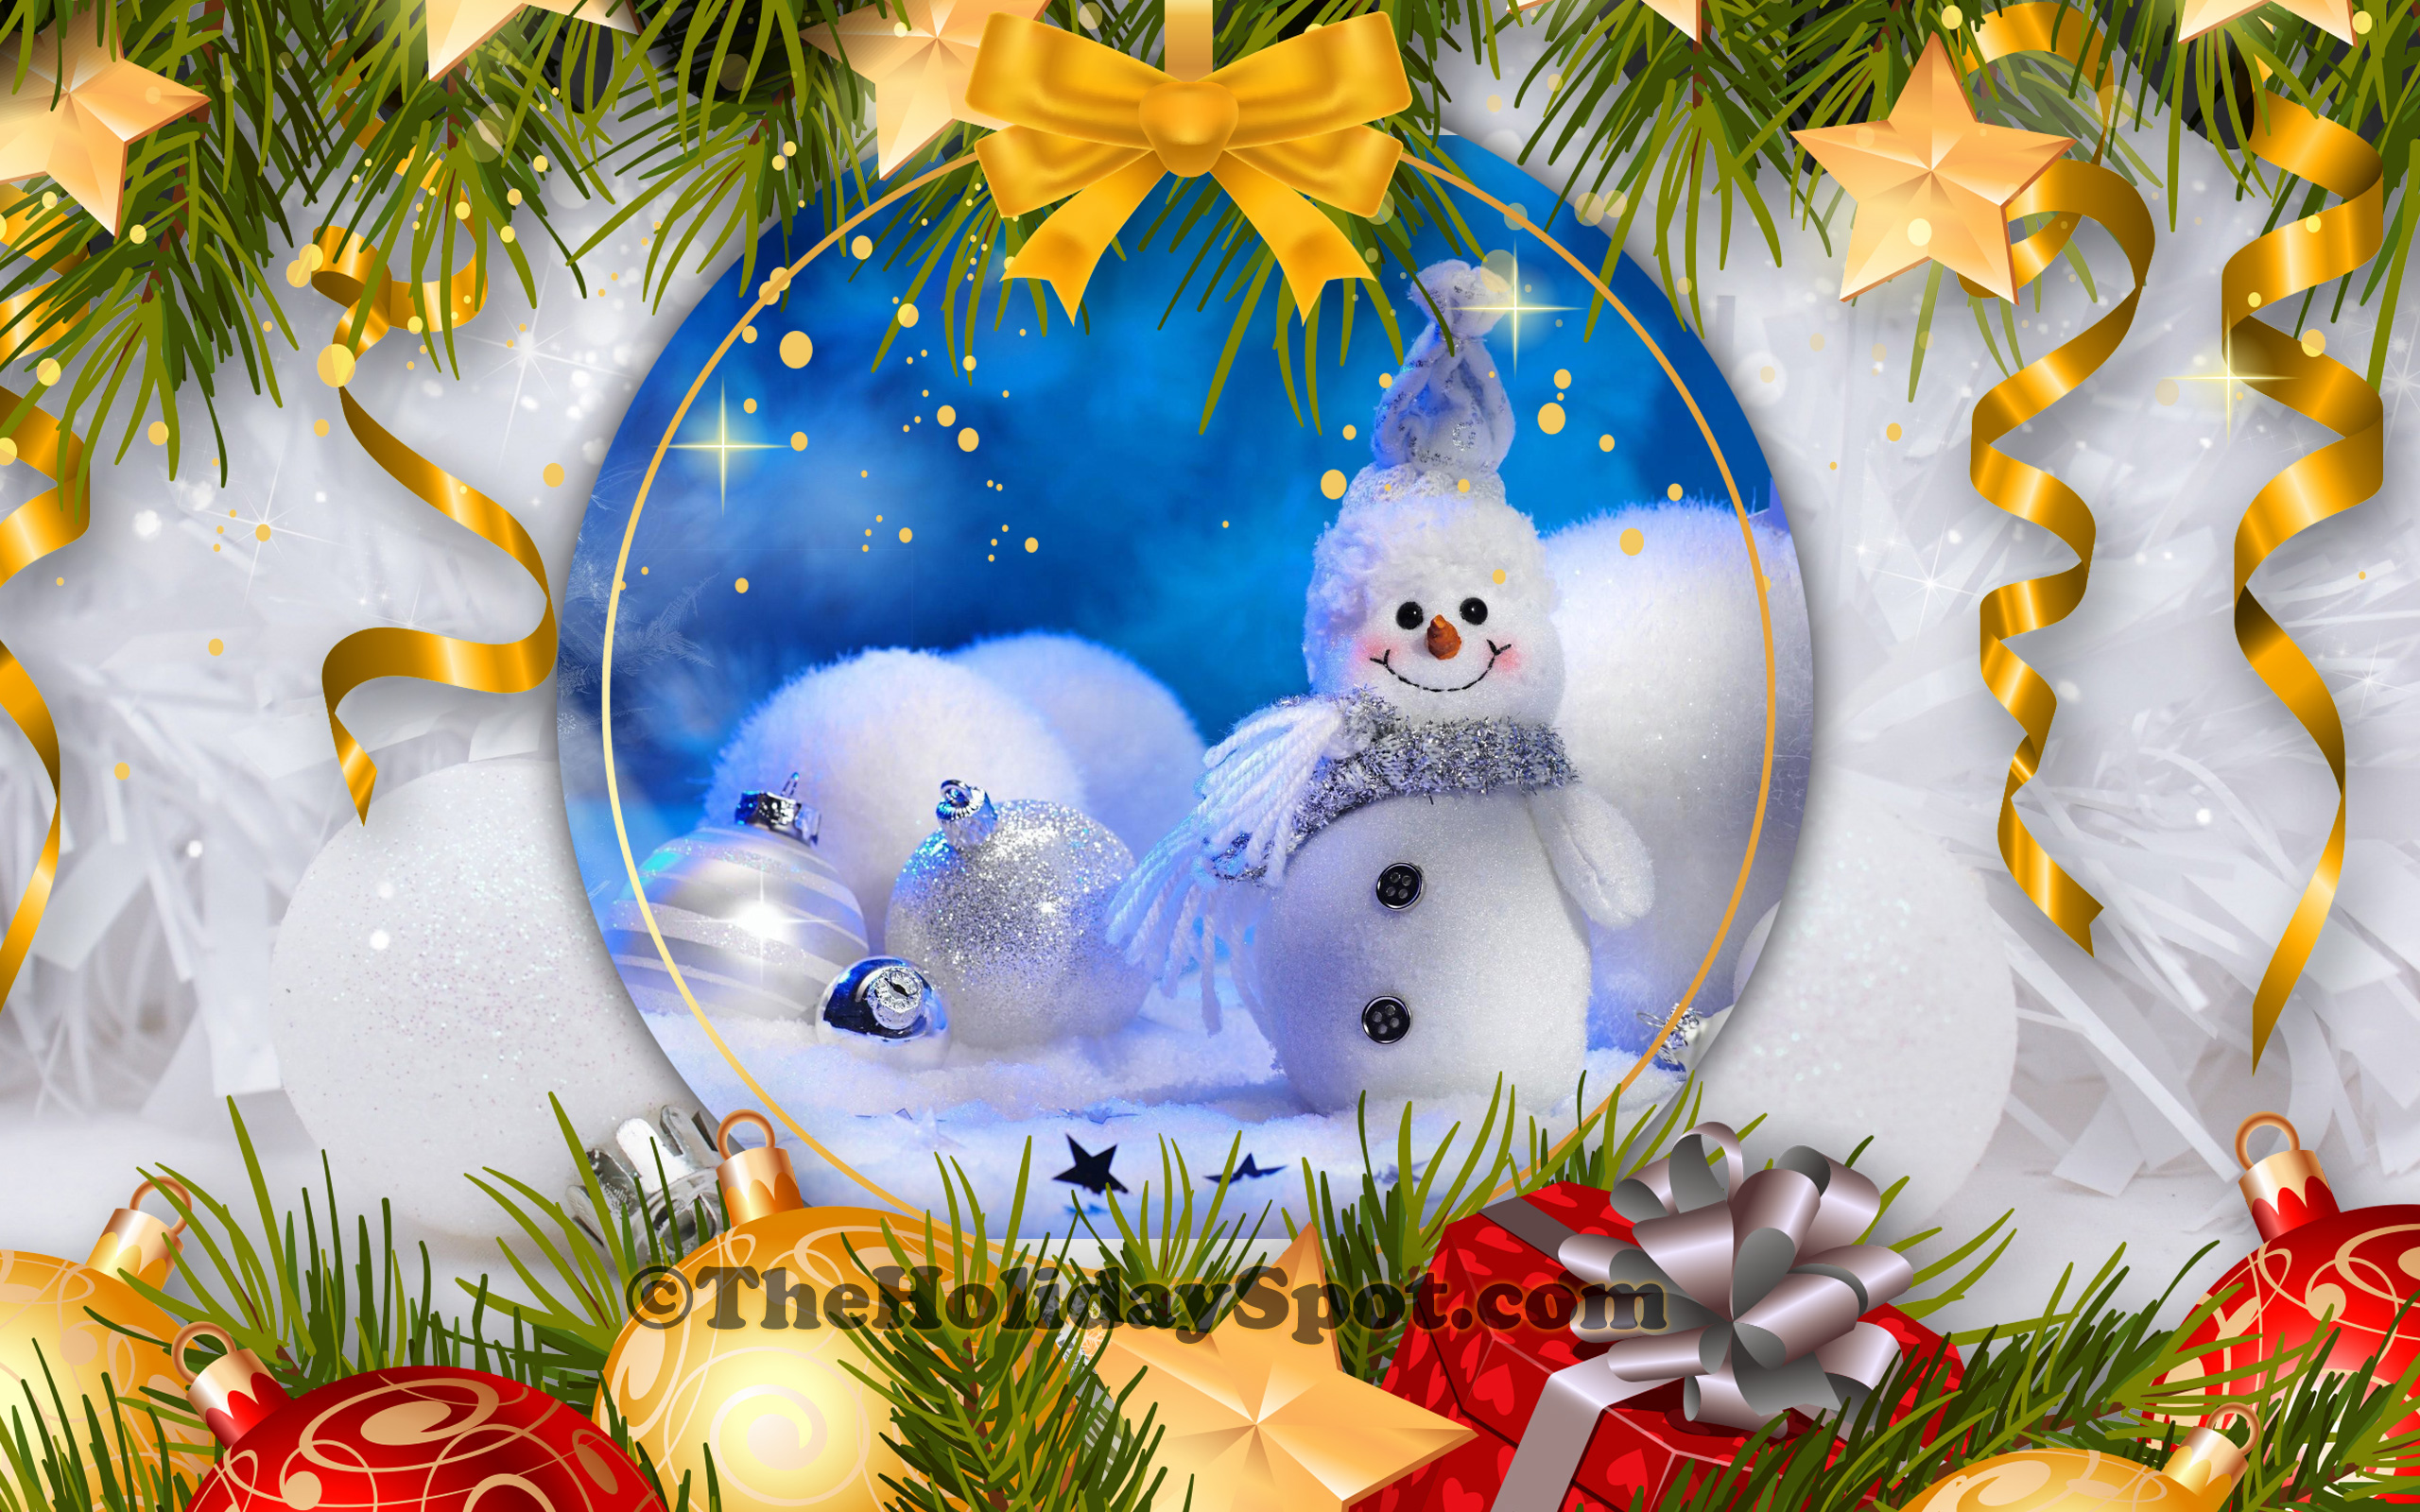 90 Christmas Hd 1080p Wallpapers Download Christmas Hd Wallpapers Christmas Background Images